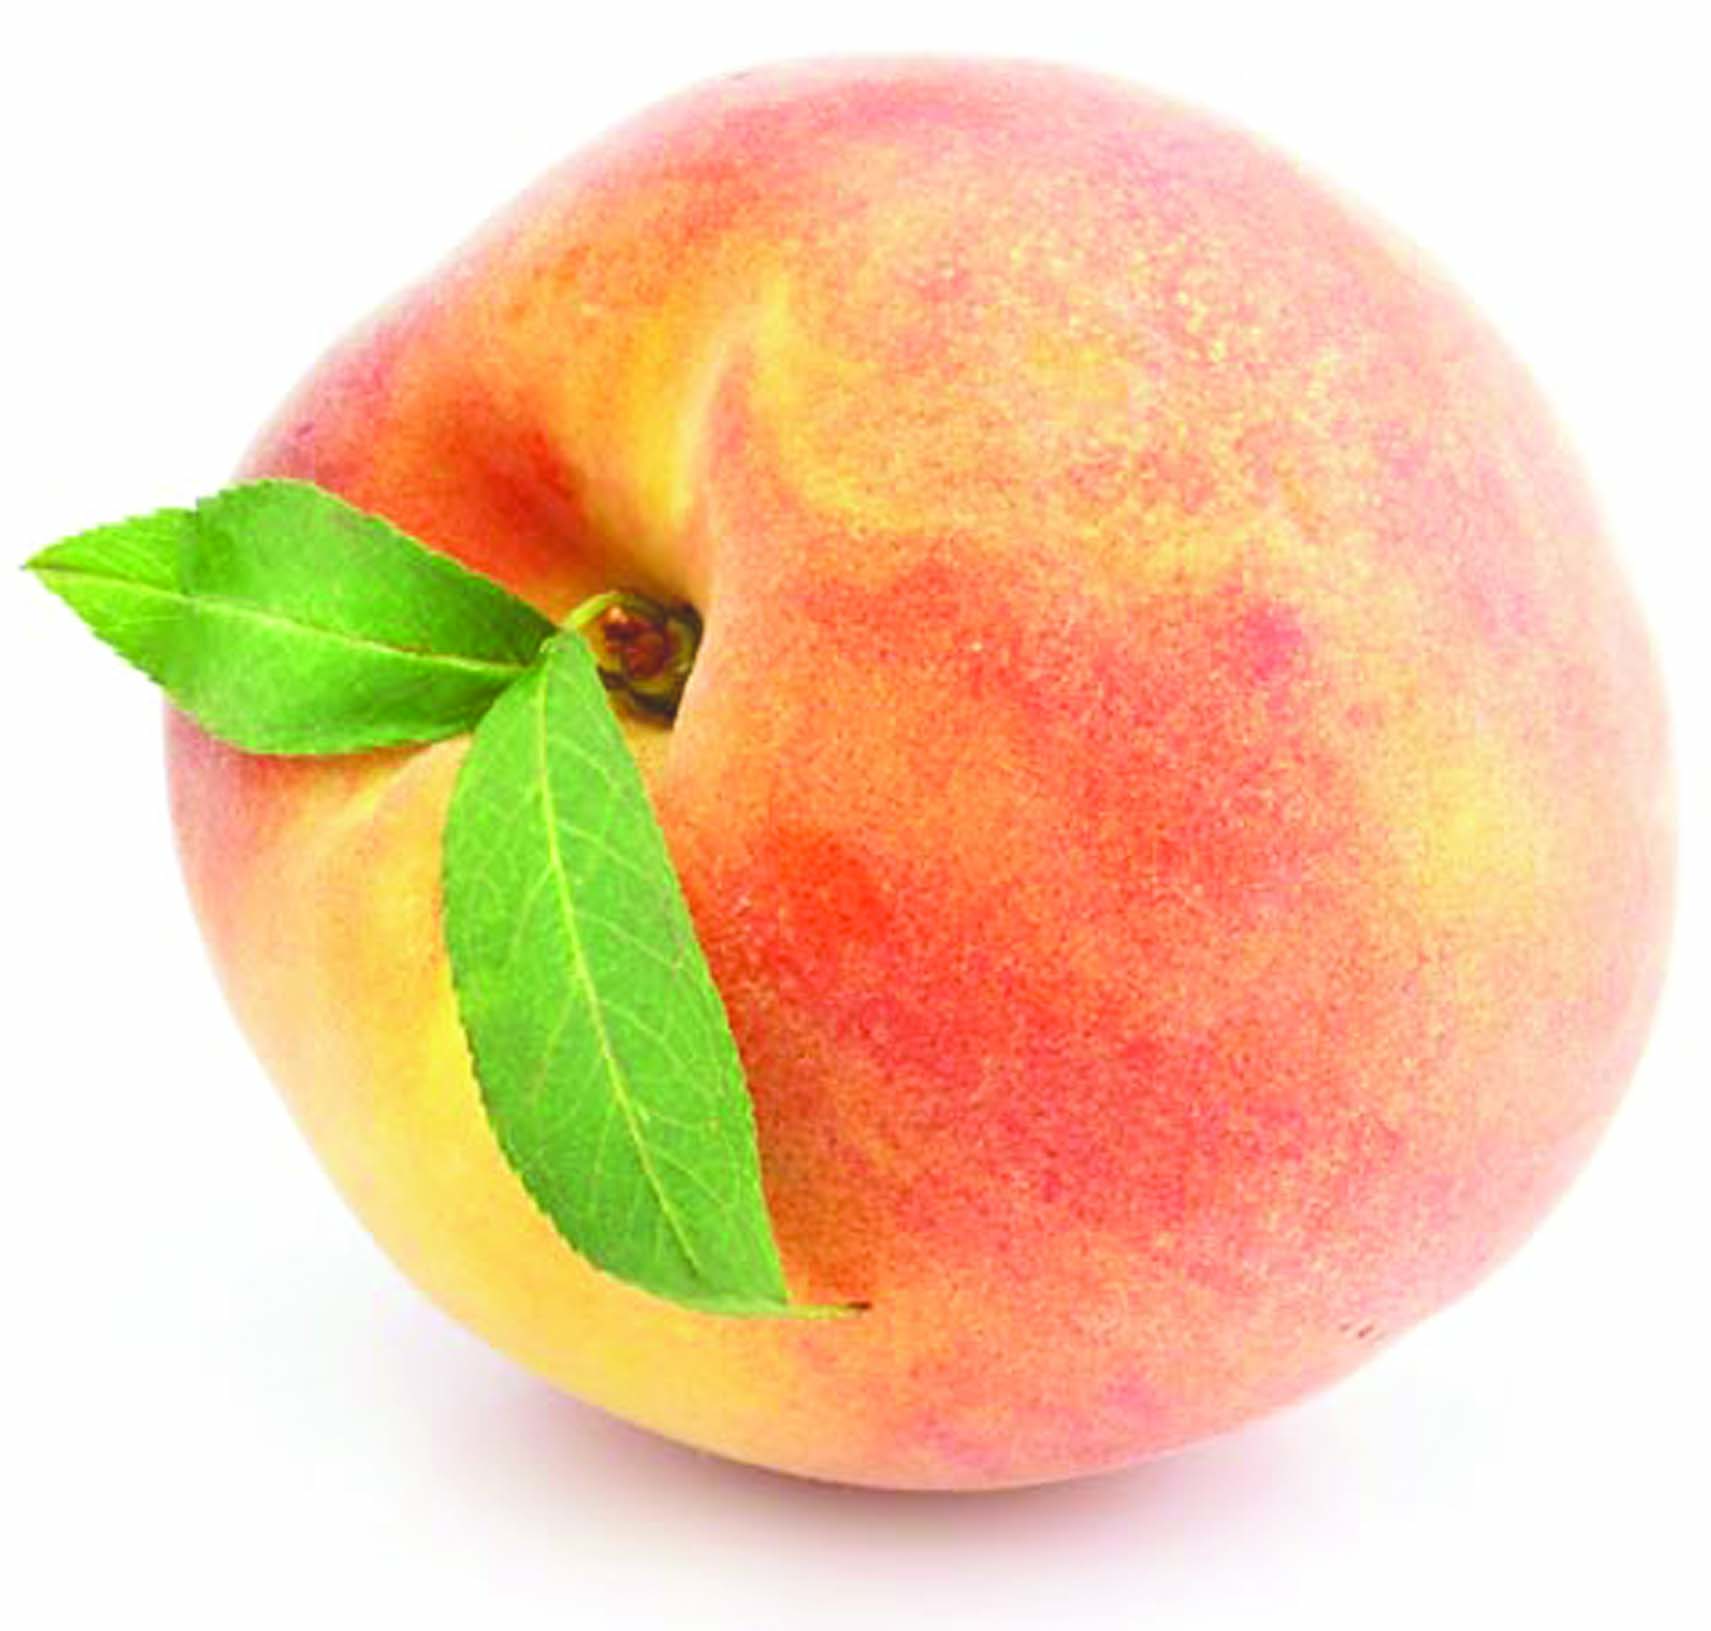 The Bix Blog • A Brief History of Peaches